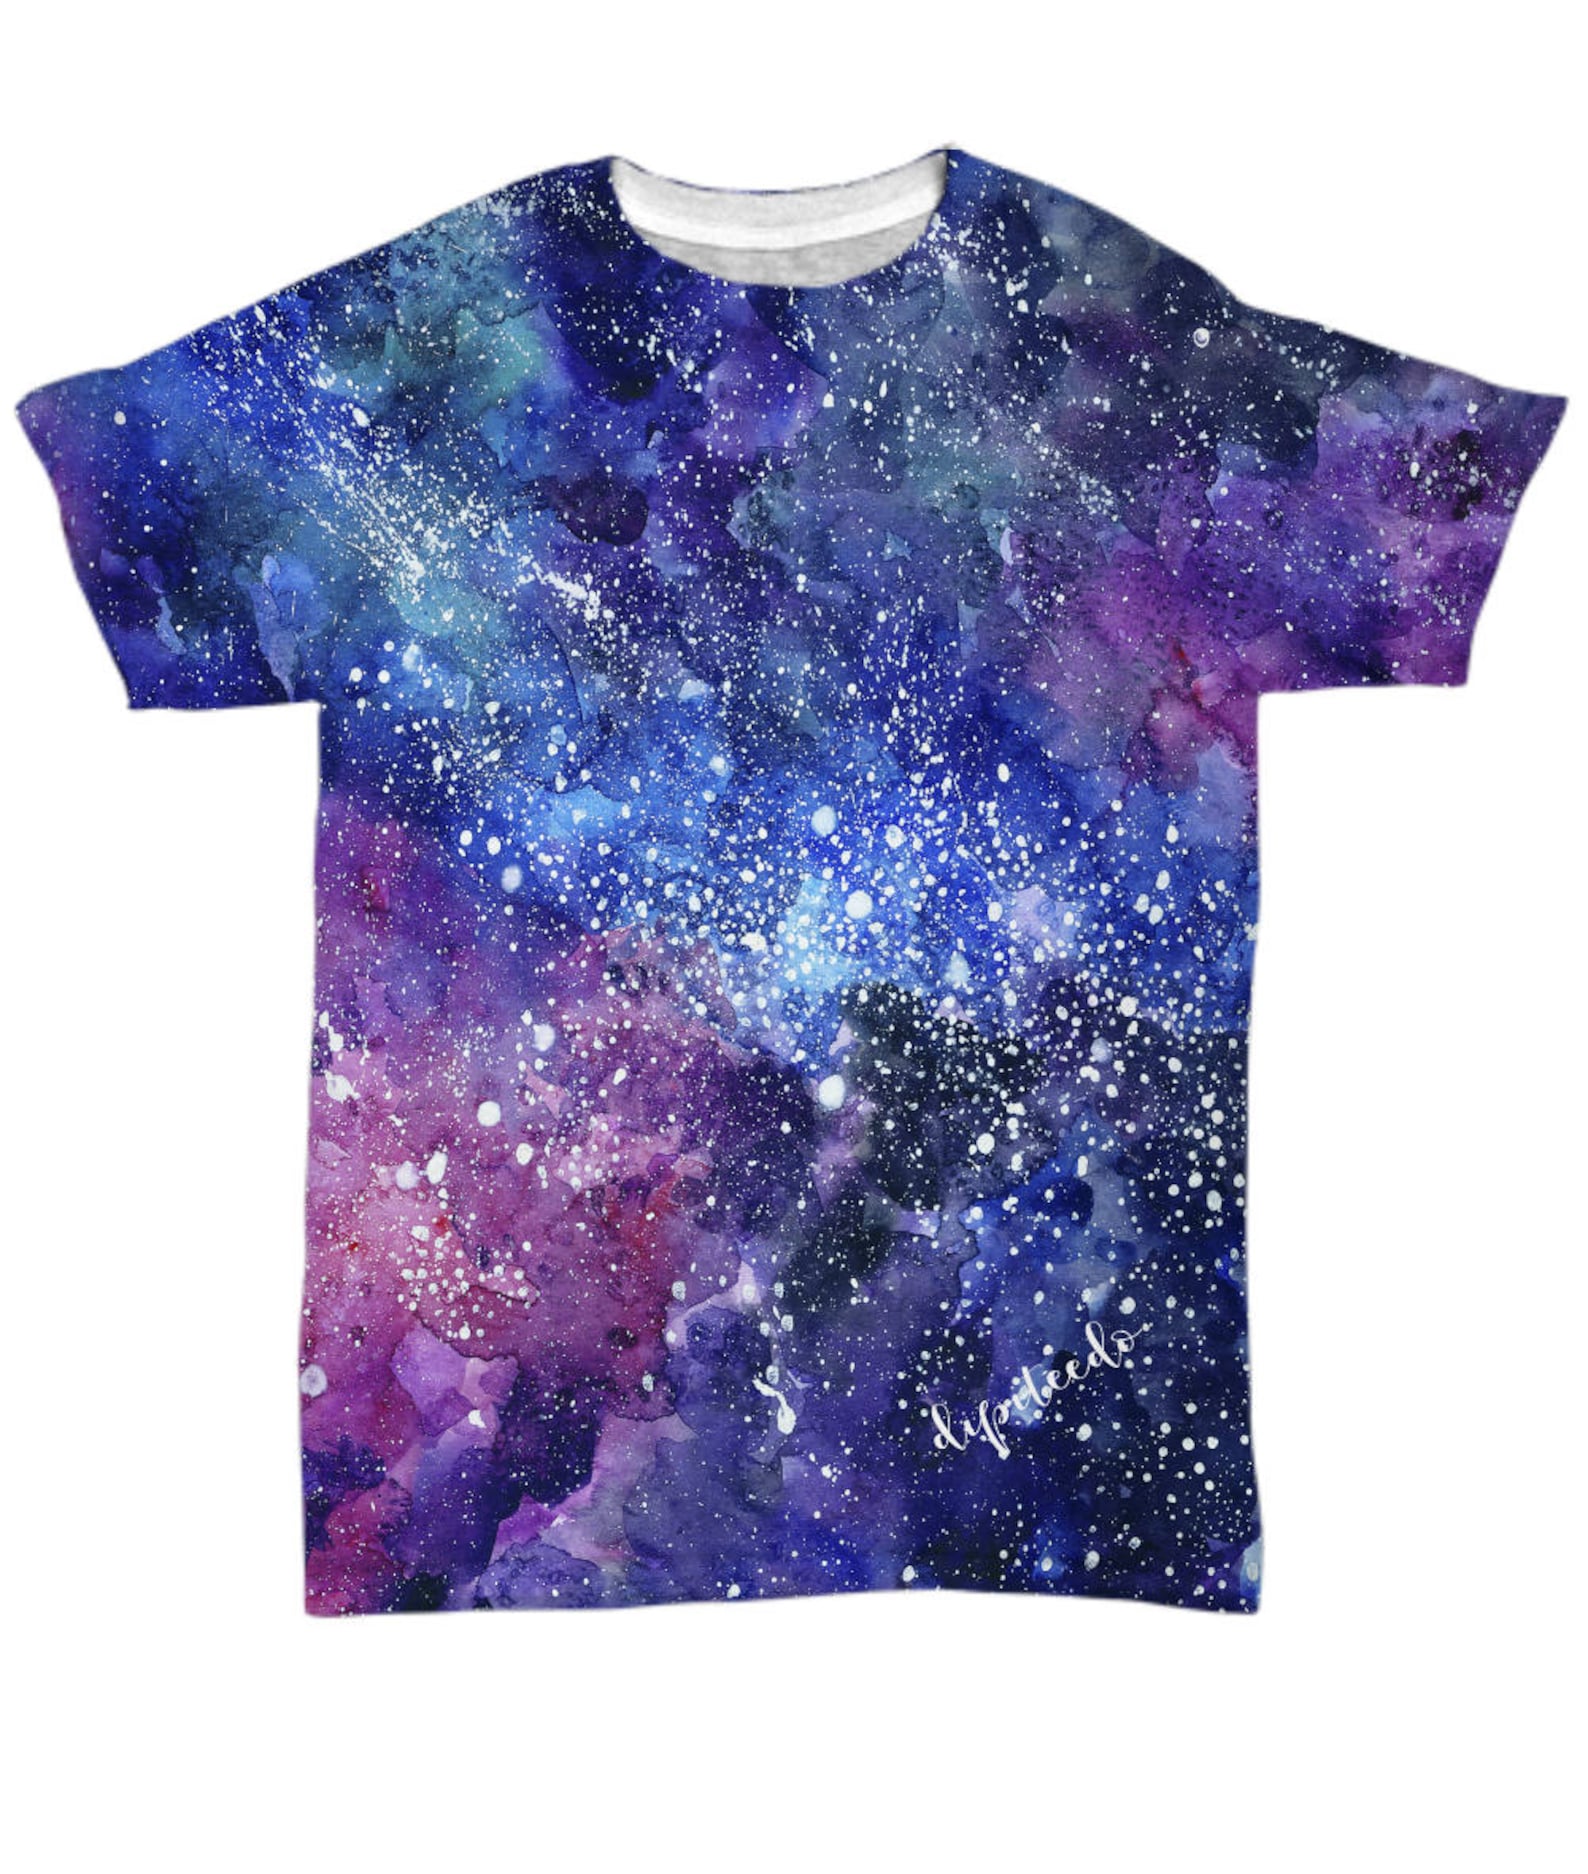 Cosmic Blue All Over Sublimated Print Tee Shirt | Etsy